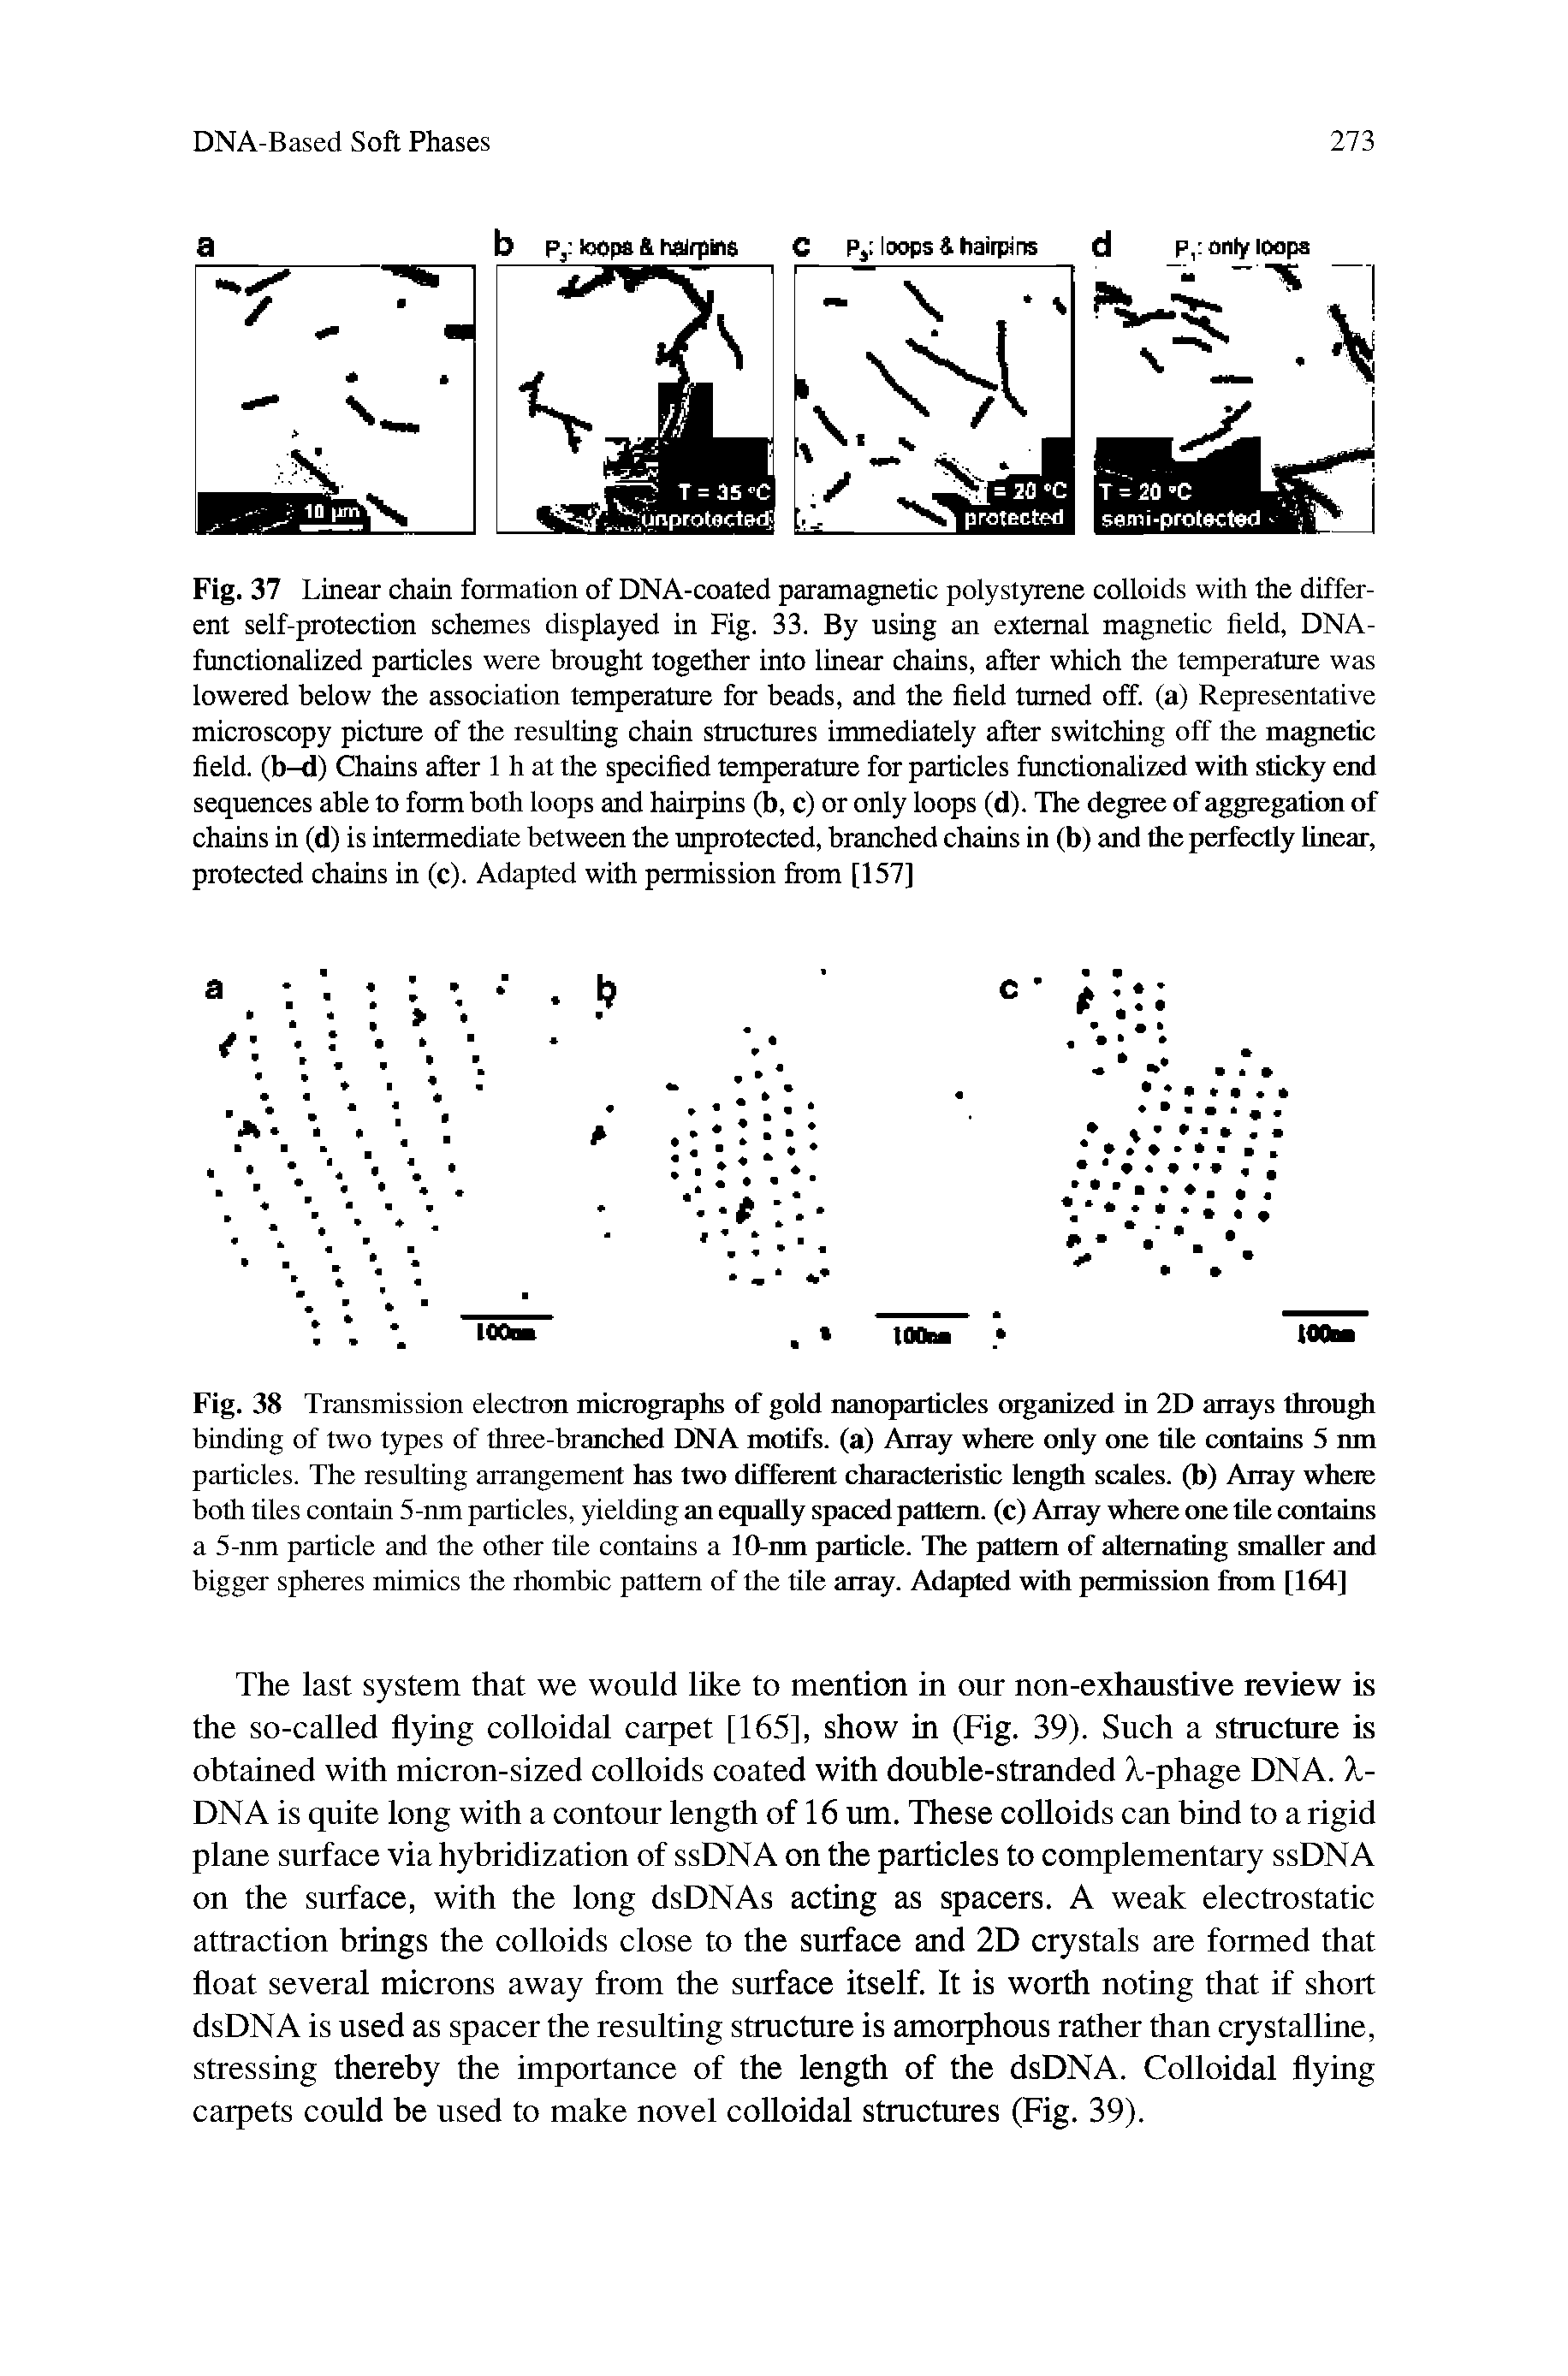 Fig. 37 Linear chain formation of DNA-coated paramagnetic polystyrene colloids with the different self-protection schemes displayed in Fig. 33. By using an external magnetic field, DNA-functionalized particles were brought together into linear chains, after which the temperature was lowered below the association temperature for beads, and the field turned off. (a) Representative microscopy picture of the resulting chain structures immediately after switching off the magnetic field, (b-d) Chains after 1 h at the specified temperature for particles functionalized with sticky end sequences able to form both loops and hairpins (b, c) or only loops (d). The degree of aggregation of chains in (d) is intermediate between the unprotected, branched chains in (b) and the perfectly linear, protected chains in (c). Adapted with permission from [157]...